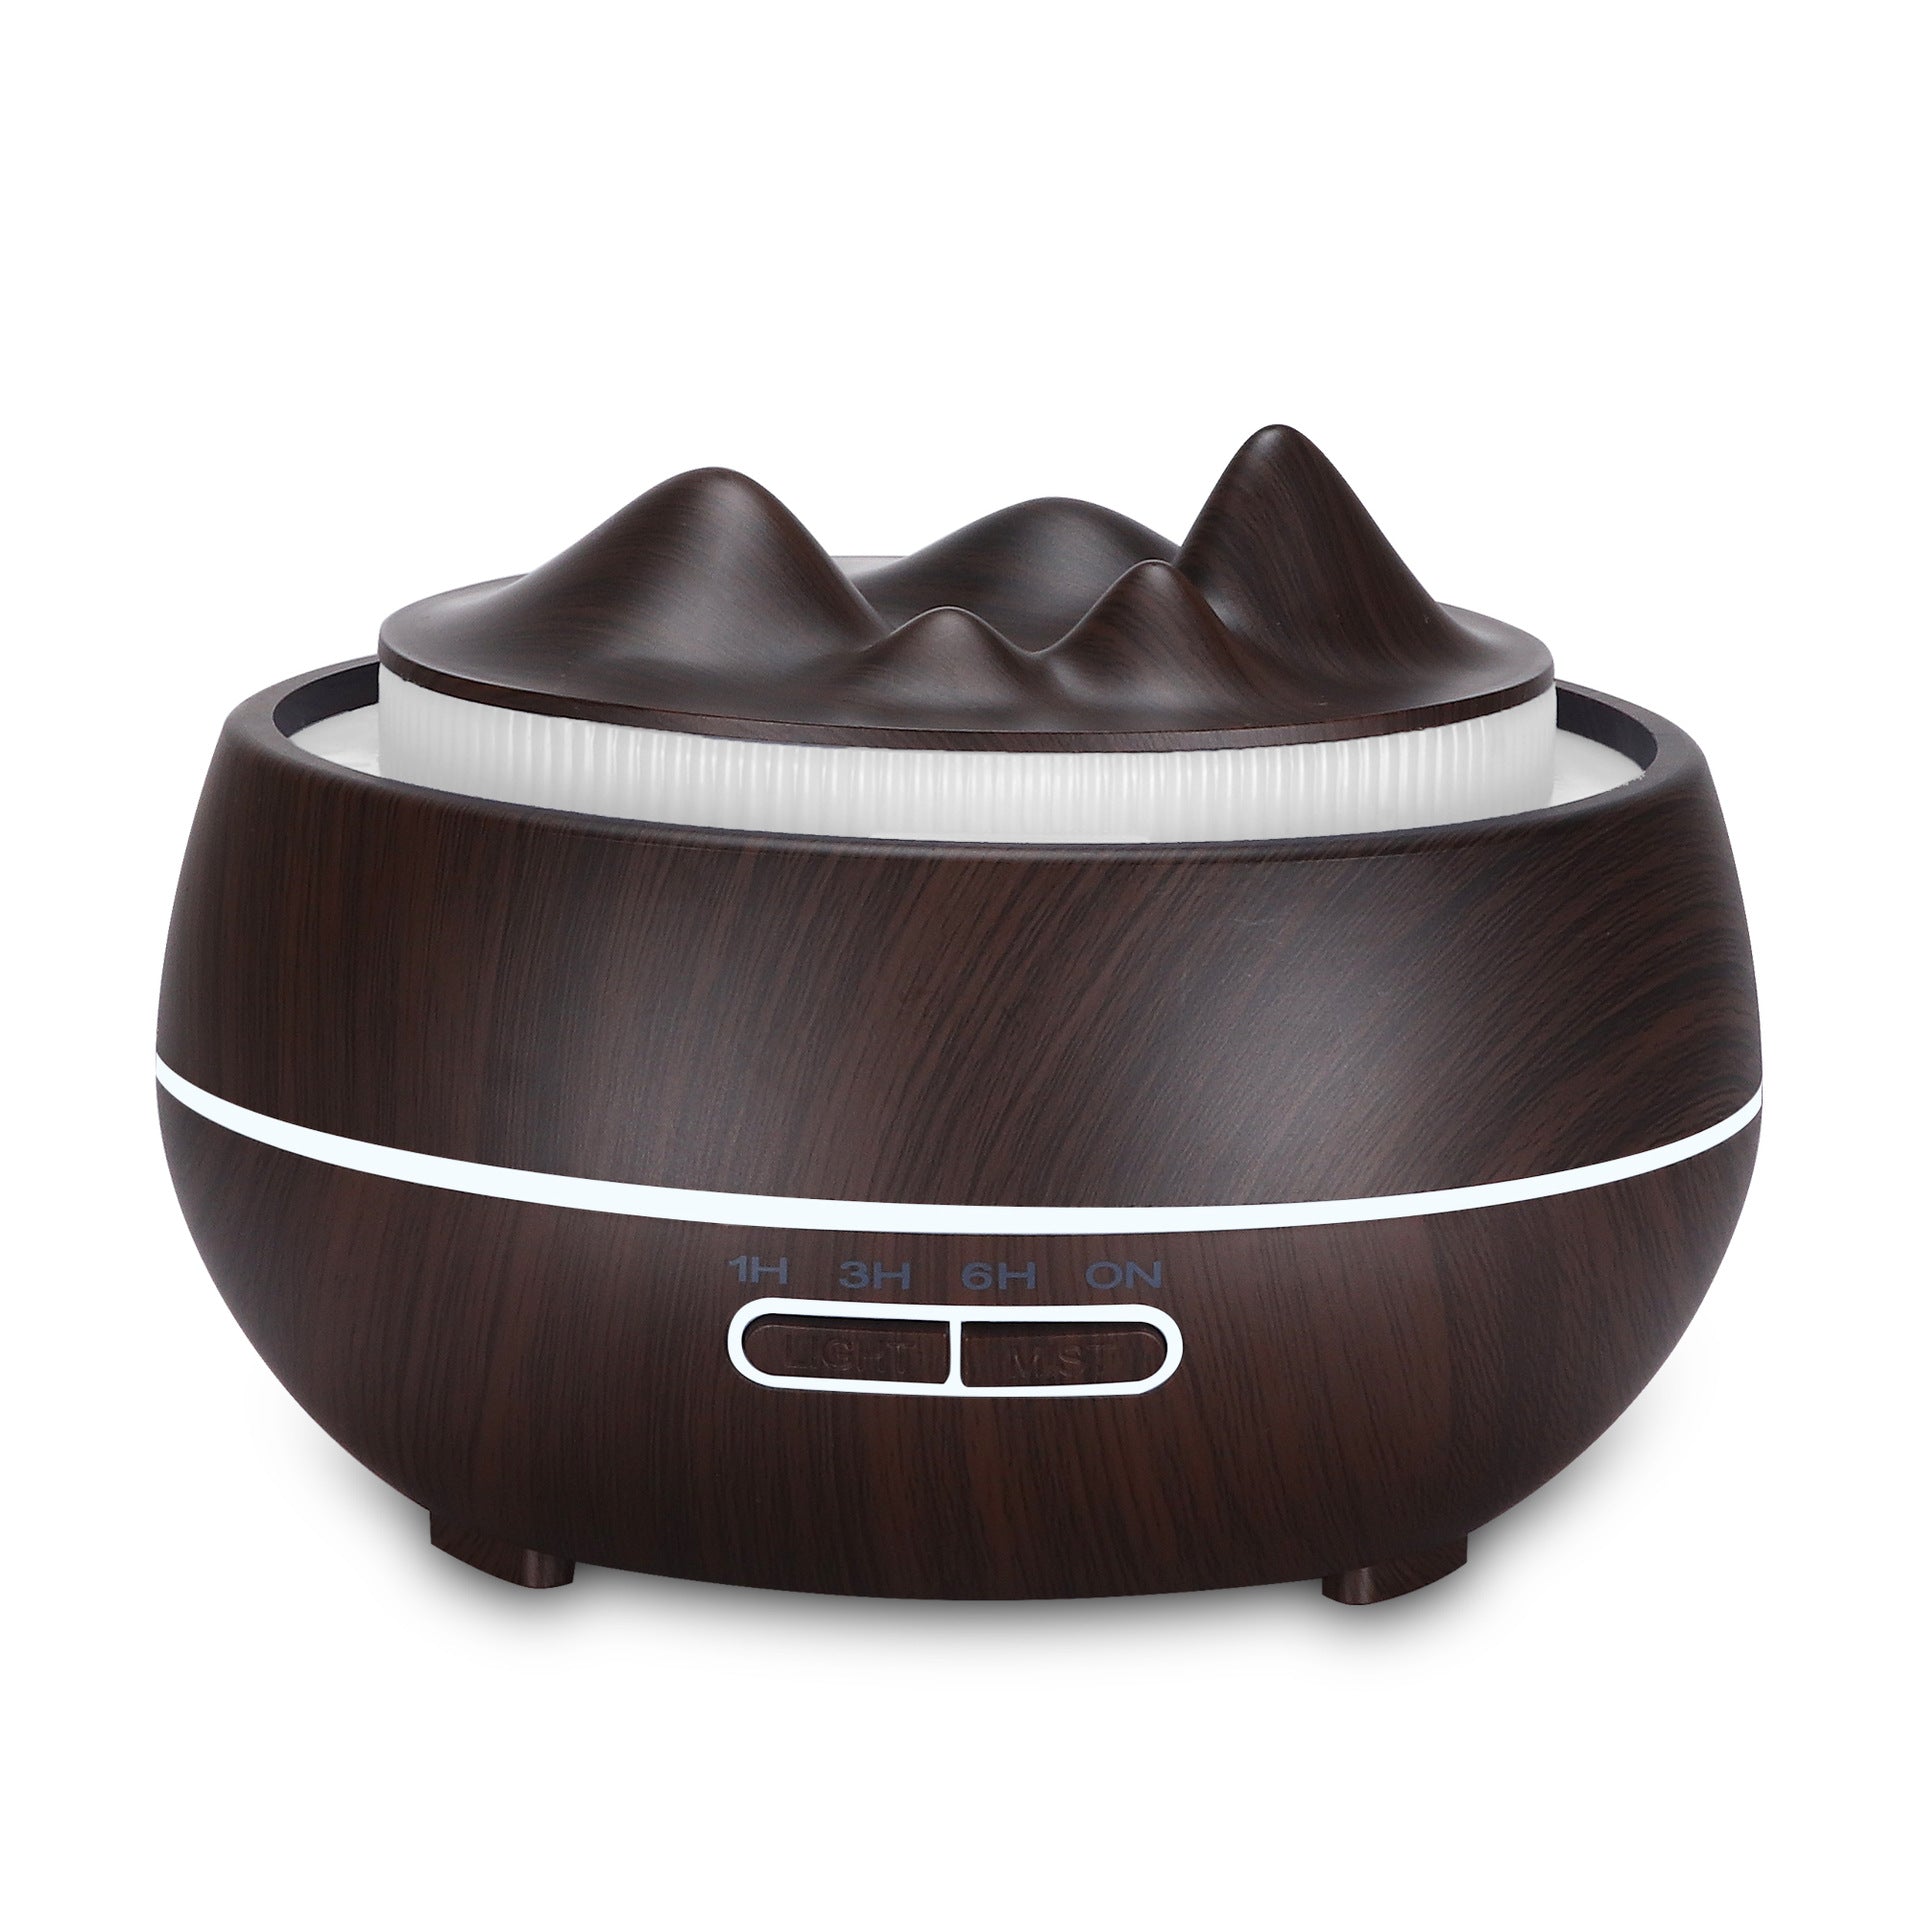 Wood Grain Aromatherapy Humidifier Print on any thing USA/STOD clothes